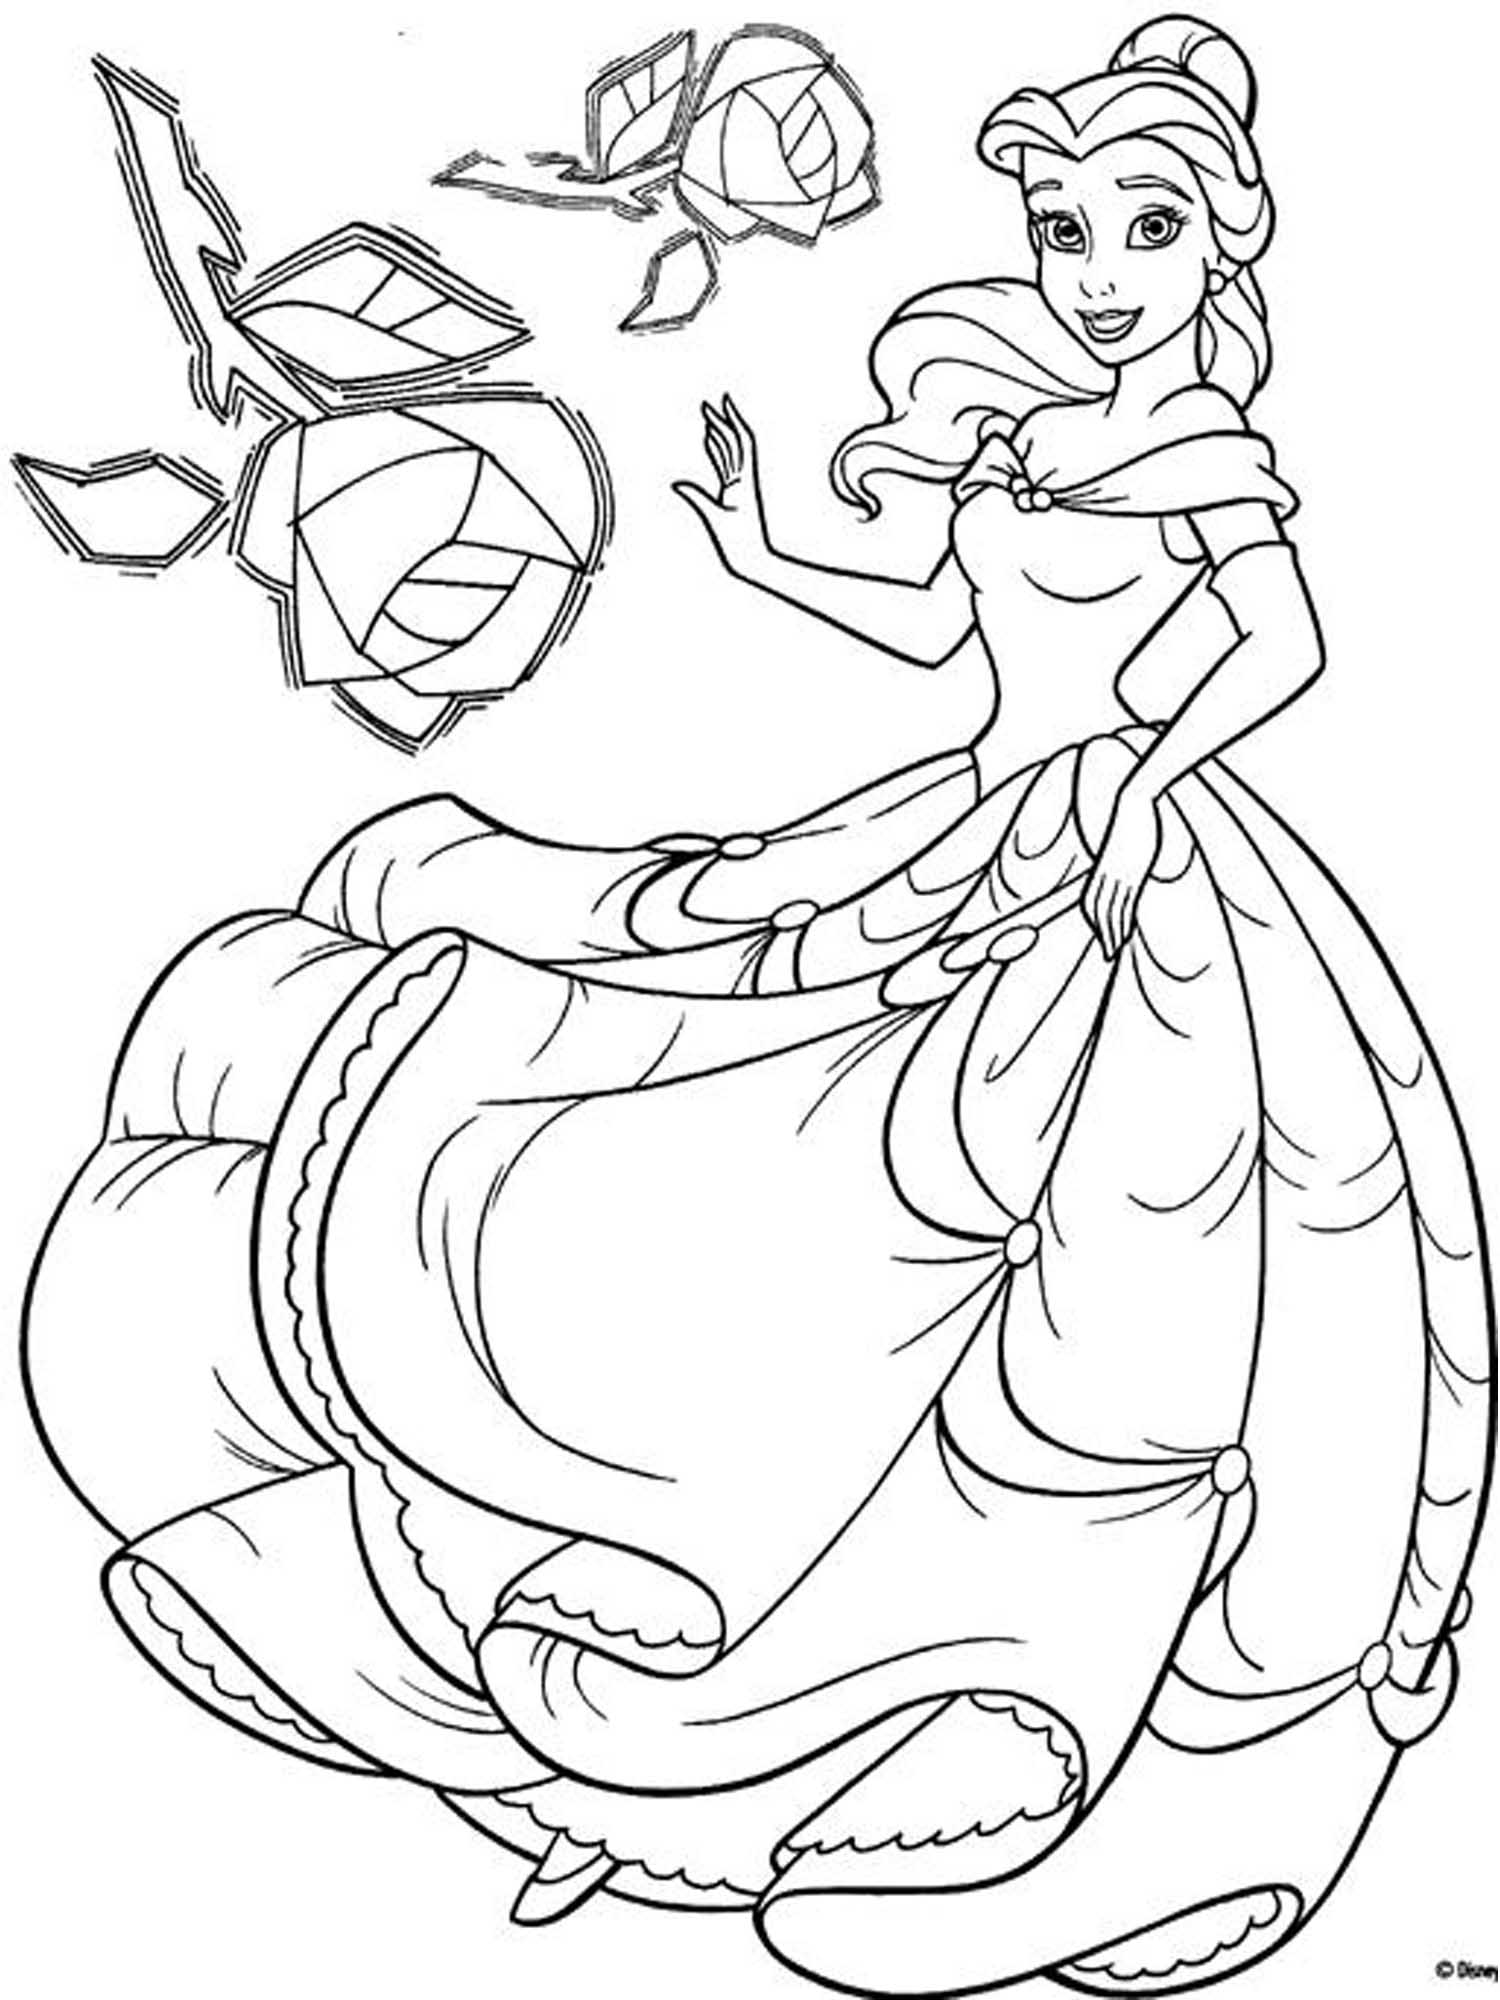 Disney Beautiful Princess Belle Coloring Pages Coloring Pages For ...